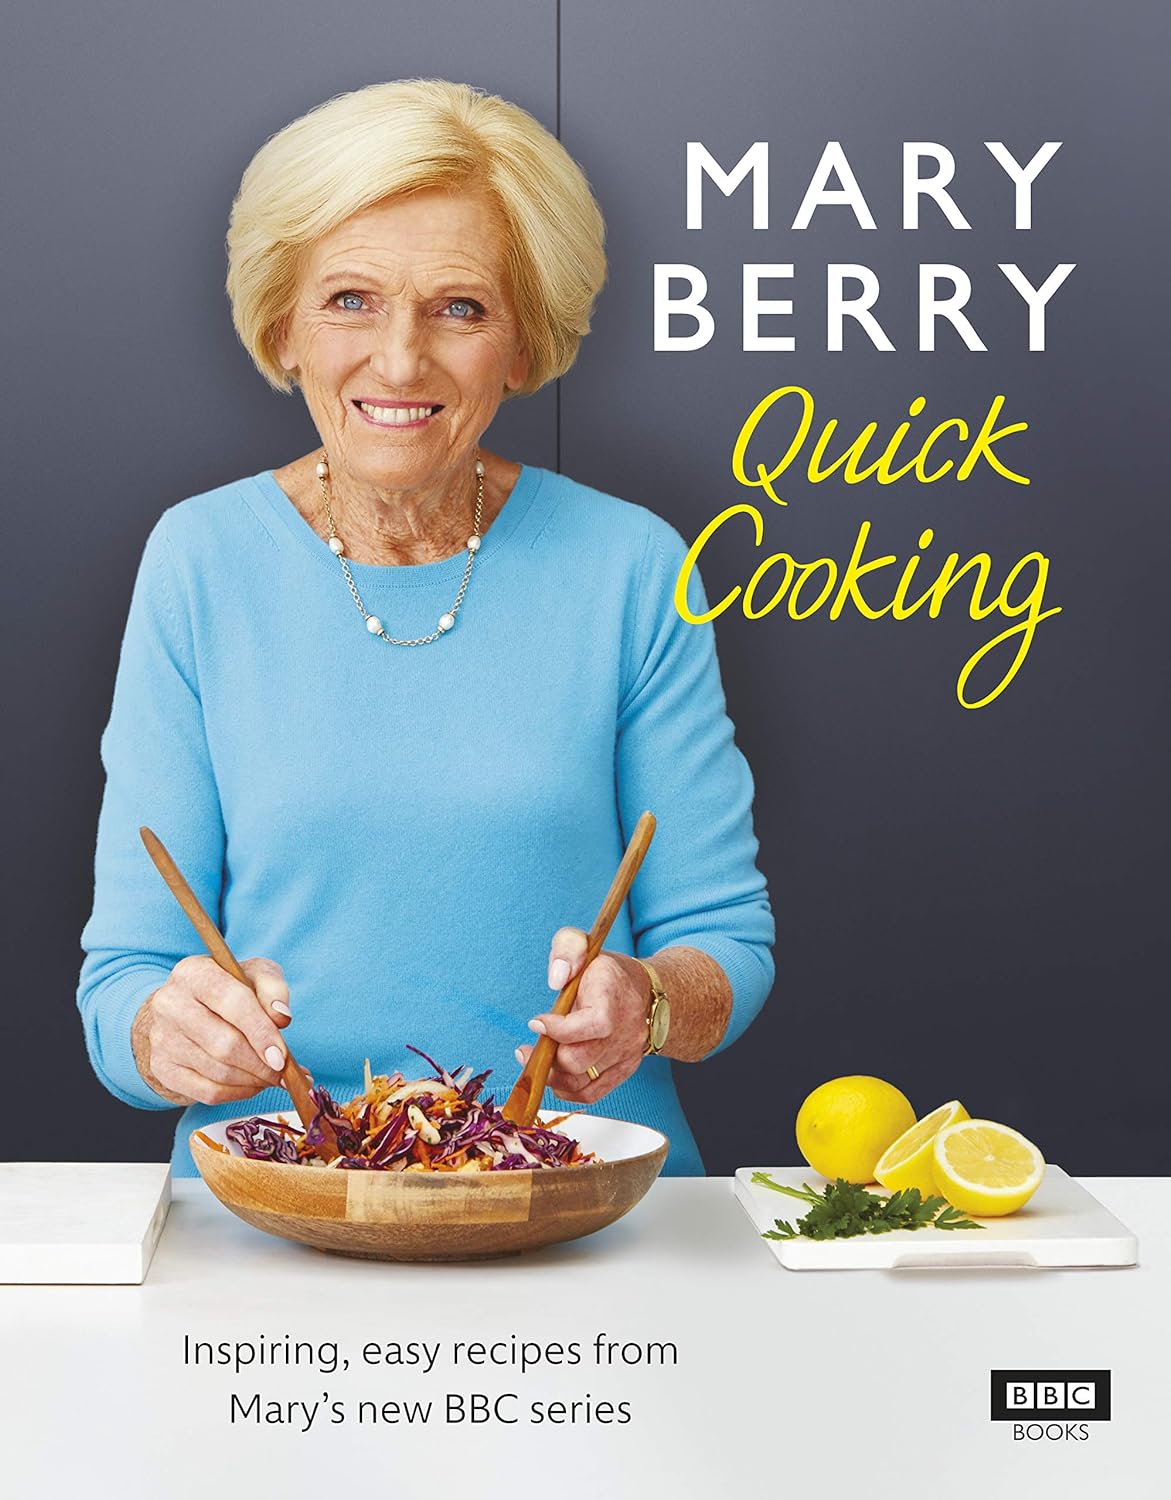 Mary Berry Quick Cooking Cookbook Cover